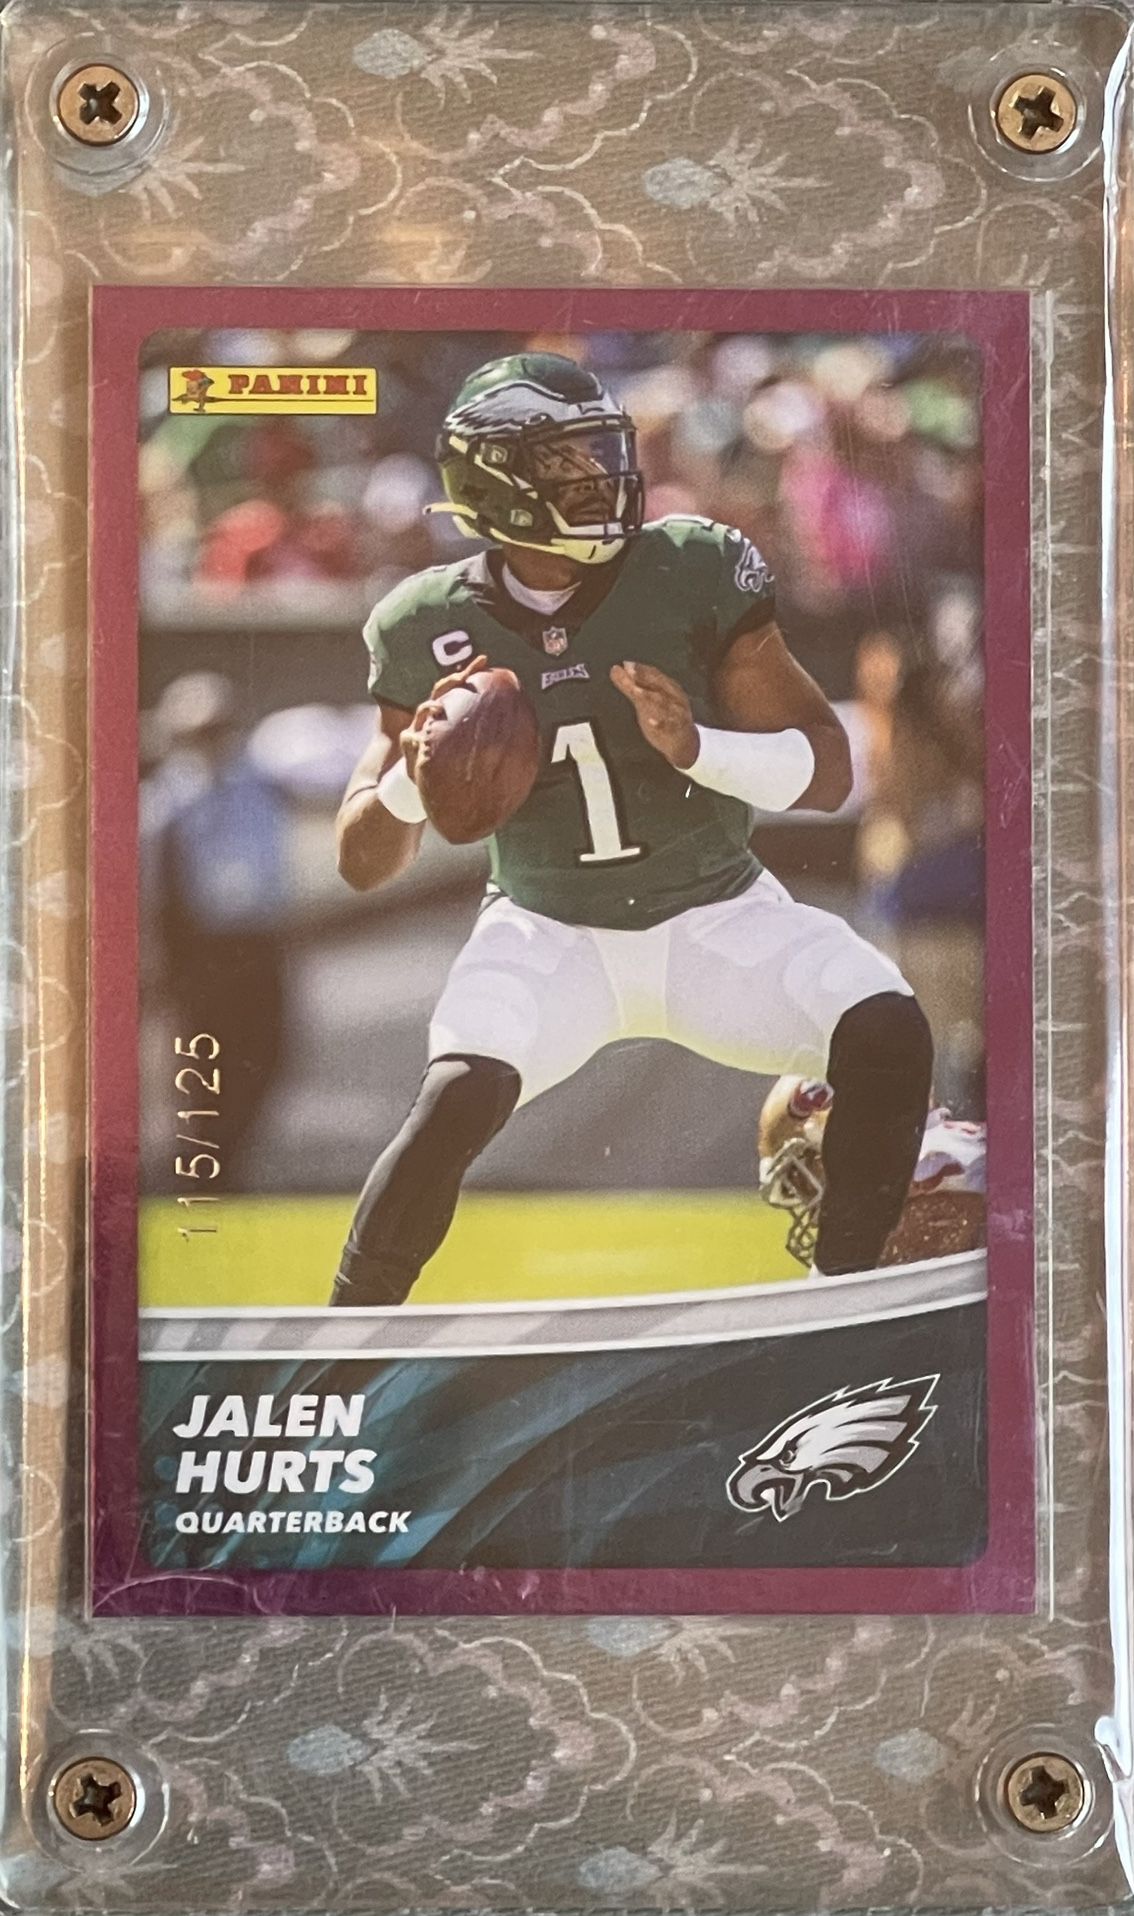 2022 Panini NFL Stickers and Card Collection Jalen Hurts #/125